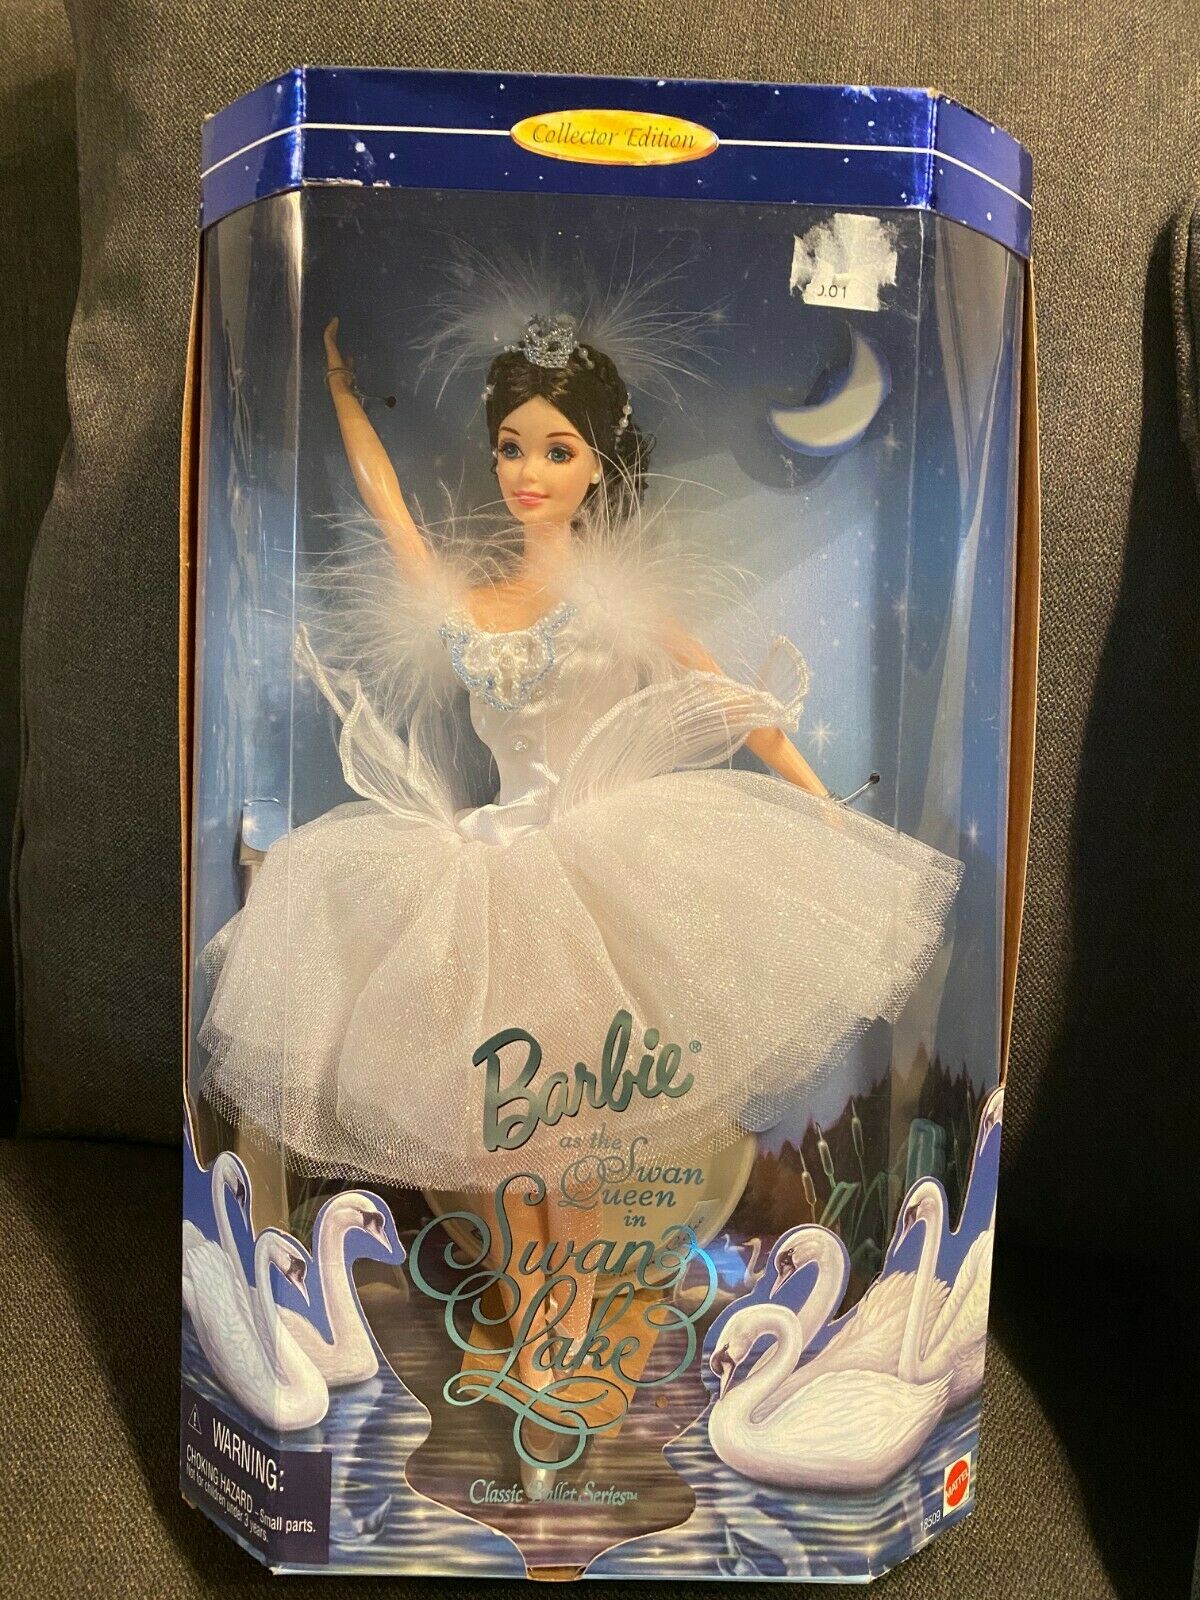 Barbie Doll As Swan Queen In Swan Lake Classic Ballet Series Collector Edition